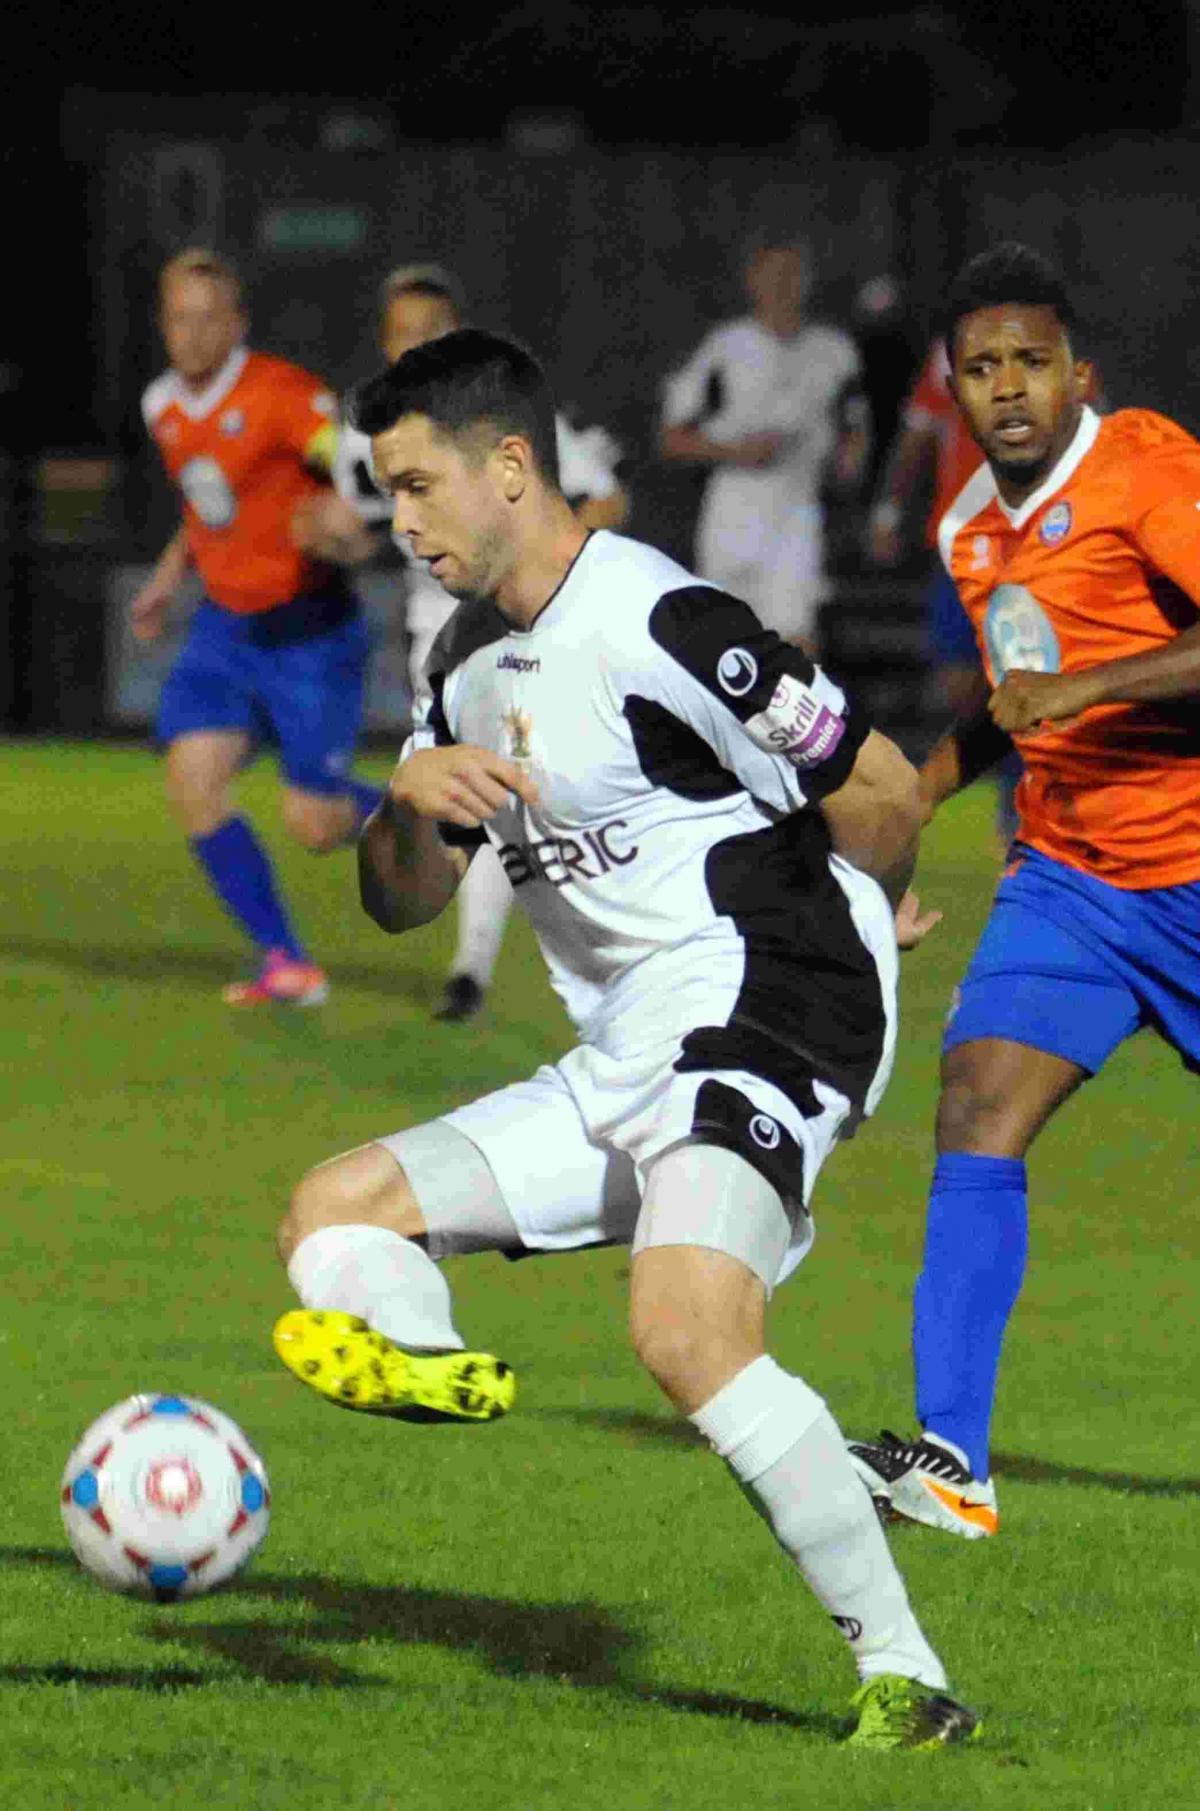 Action from Salisbury City versus Braintree Town at the Ray Mac 